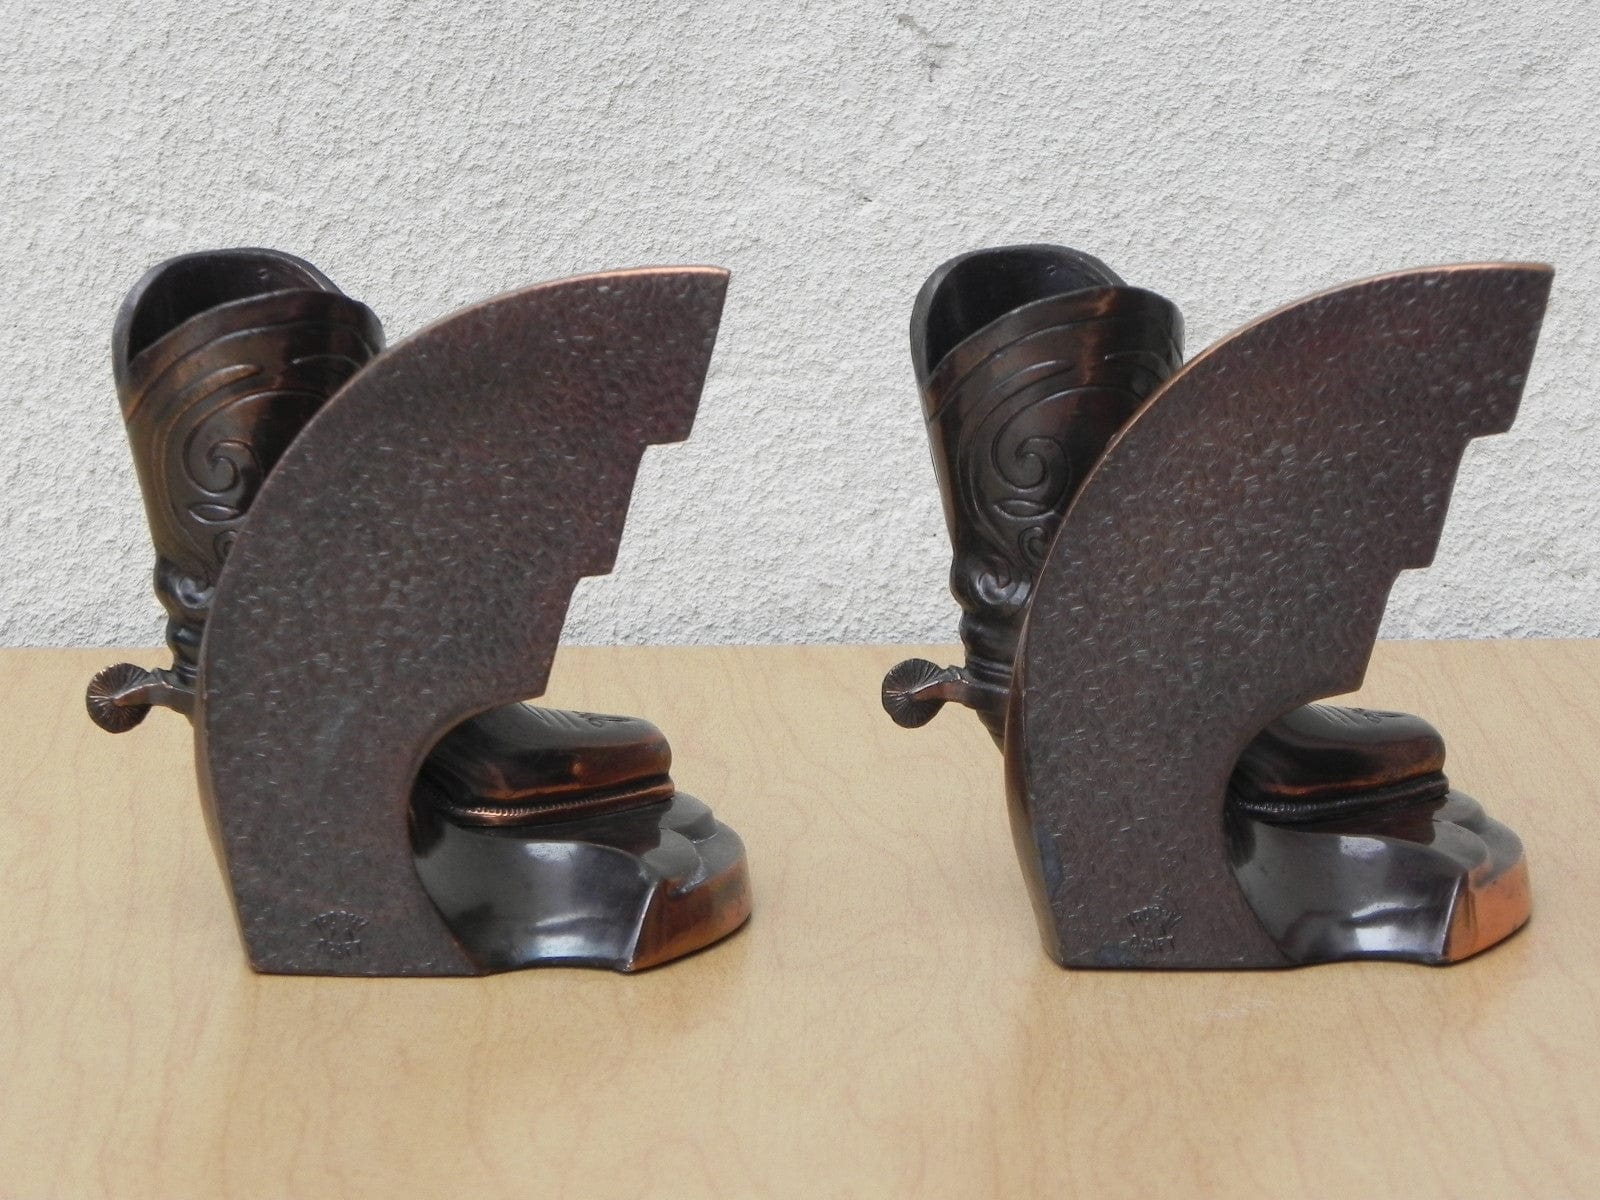 I Like Mike's Mid Century Modern Accessories Brass Cowboy Boot Bookends by Trophy Craft